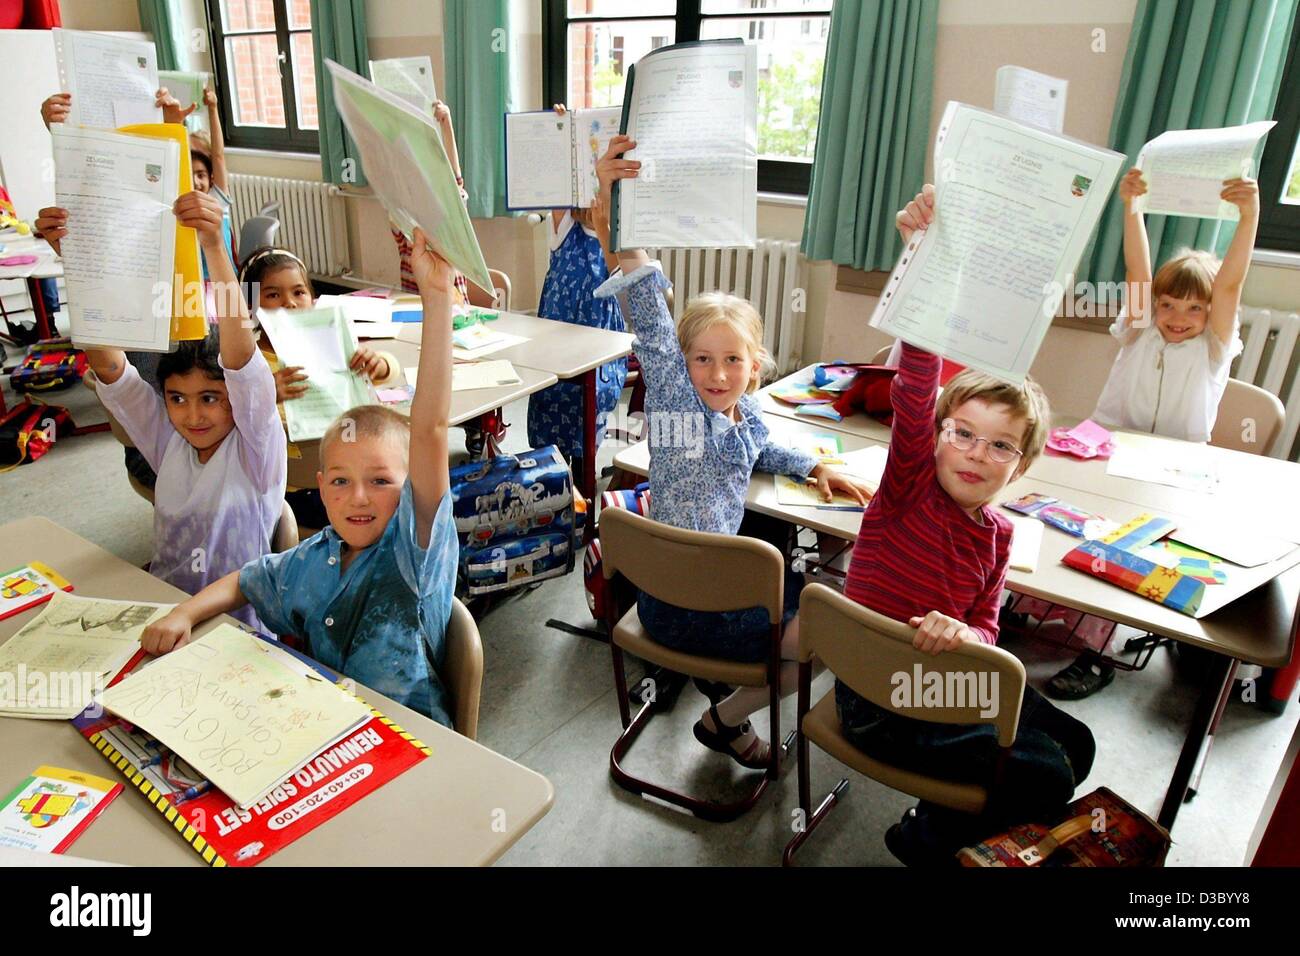 (dpa) - First graders proudly show their first end-of-year school reports at an elementary school in Magdeburg, Germany, 9 July 2003. The day was also the last day of school before the start of the summer holidays. Stock Photo